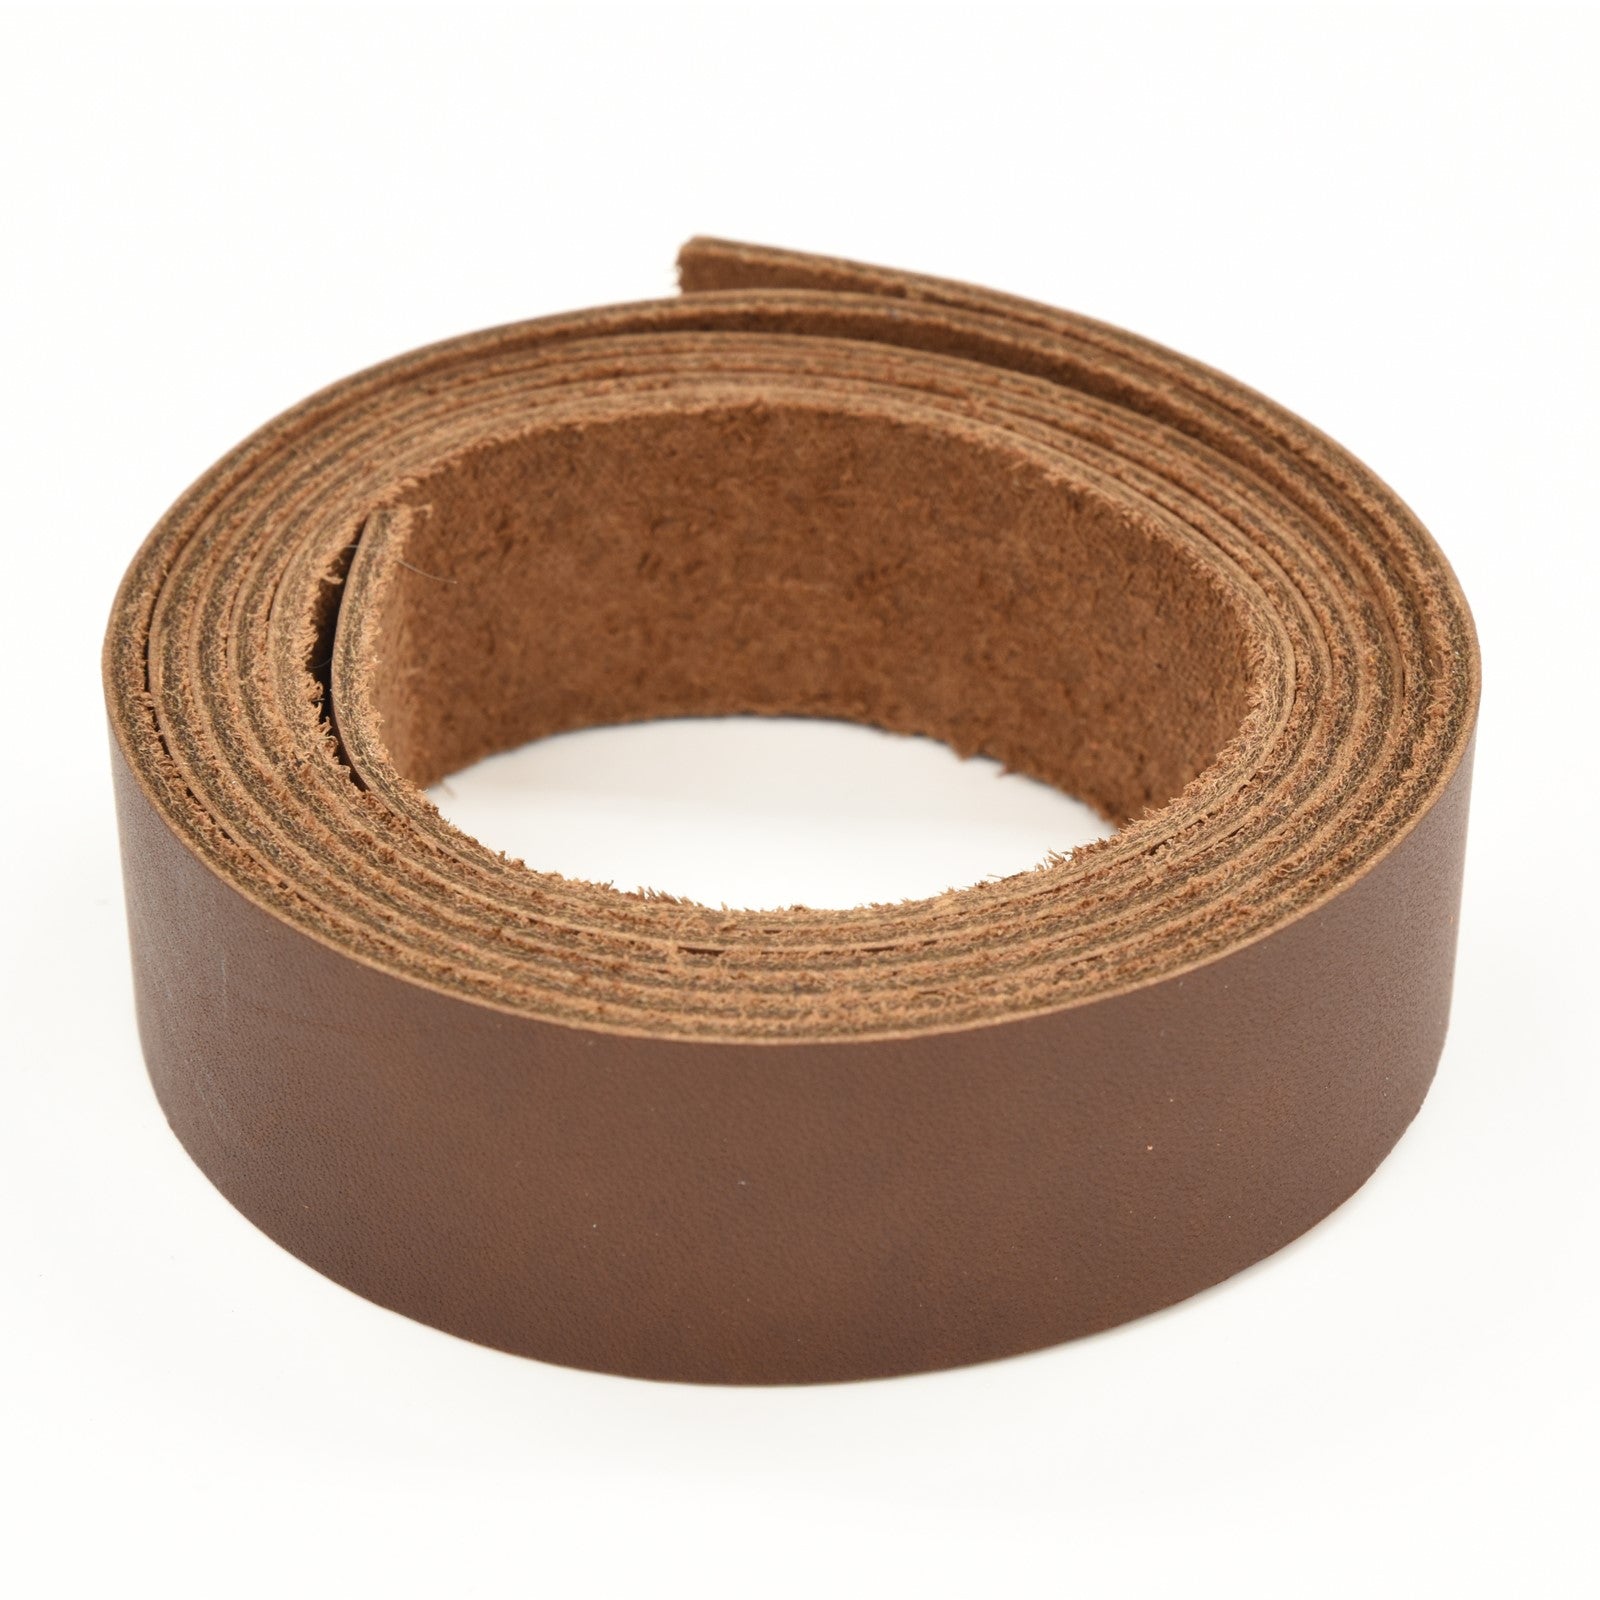 Oil Tanned Summits Edge Leather 54" Strap Various Colors and Widths 4-6 oz, Sugar Loaf Dark Brown / 1 | The Leather Guy